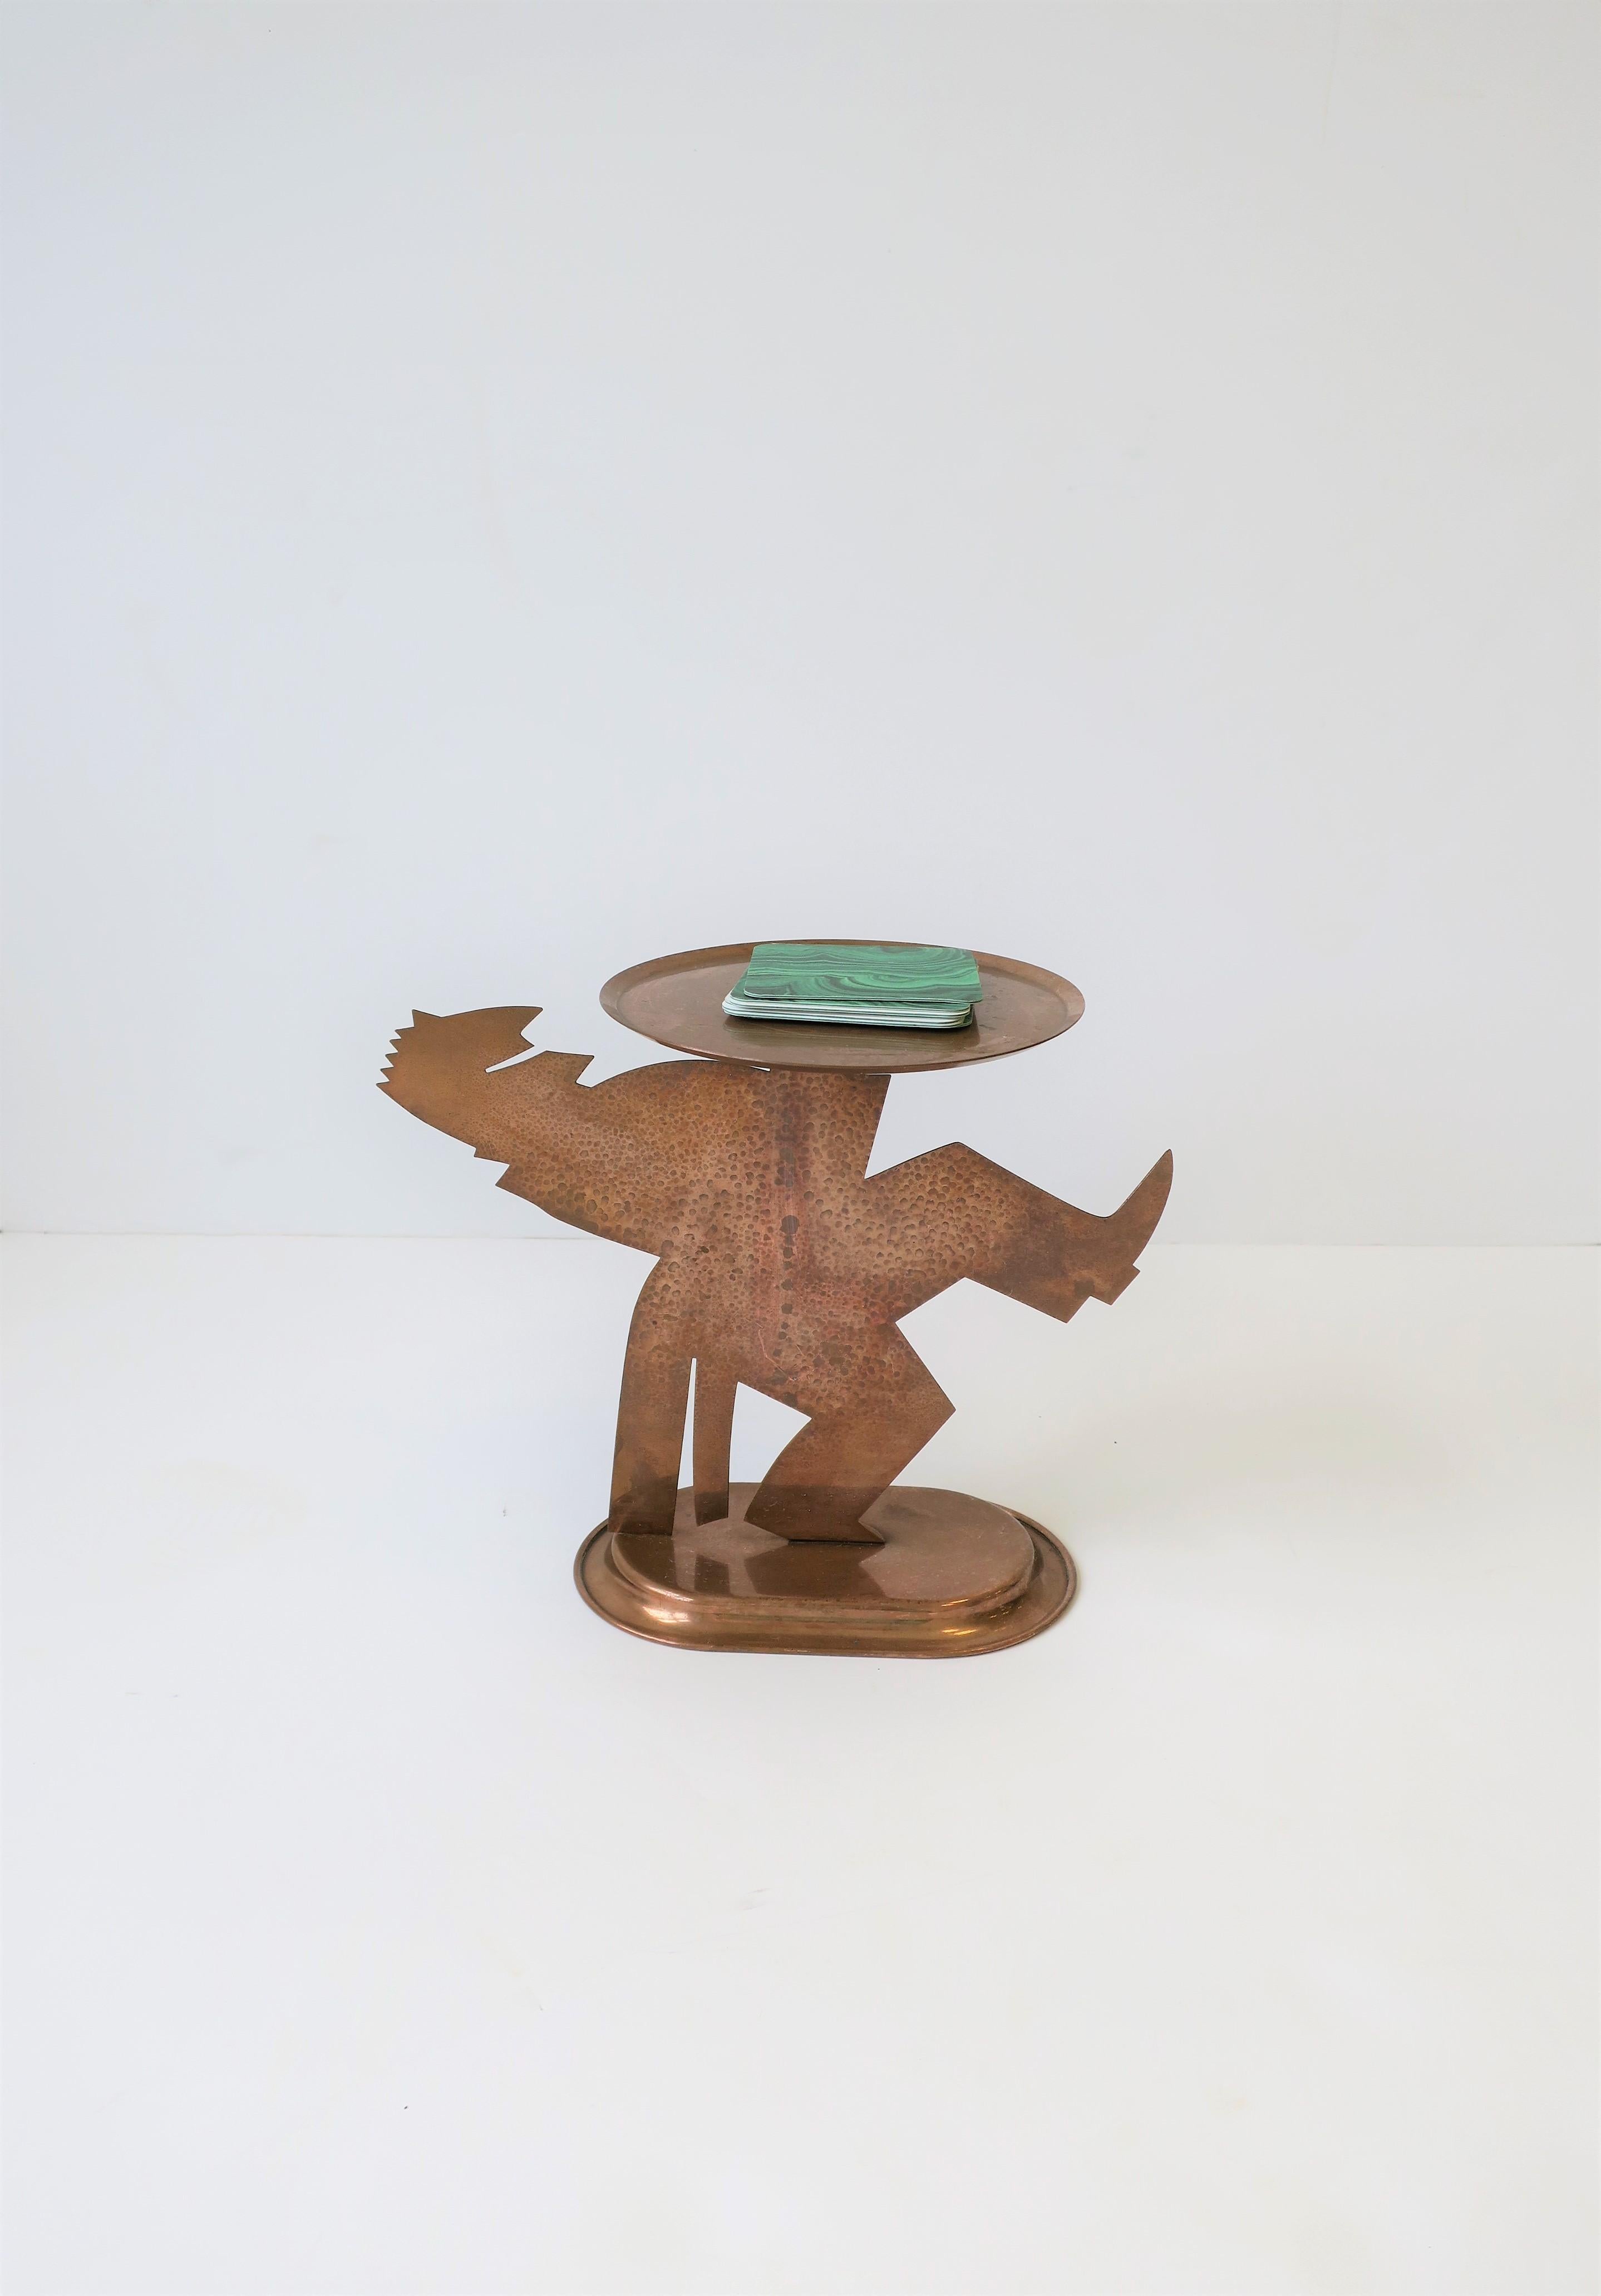 A beautiful rare American Art Deco period copper figurative sculpture piece by the Chase Brass and Copper Company Inc., circa early 20th century, USA. This copper sculpture is of a 'waiter in coattails' holding a tray and smiling. A very cool